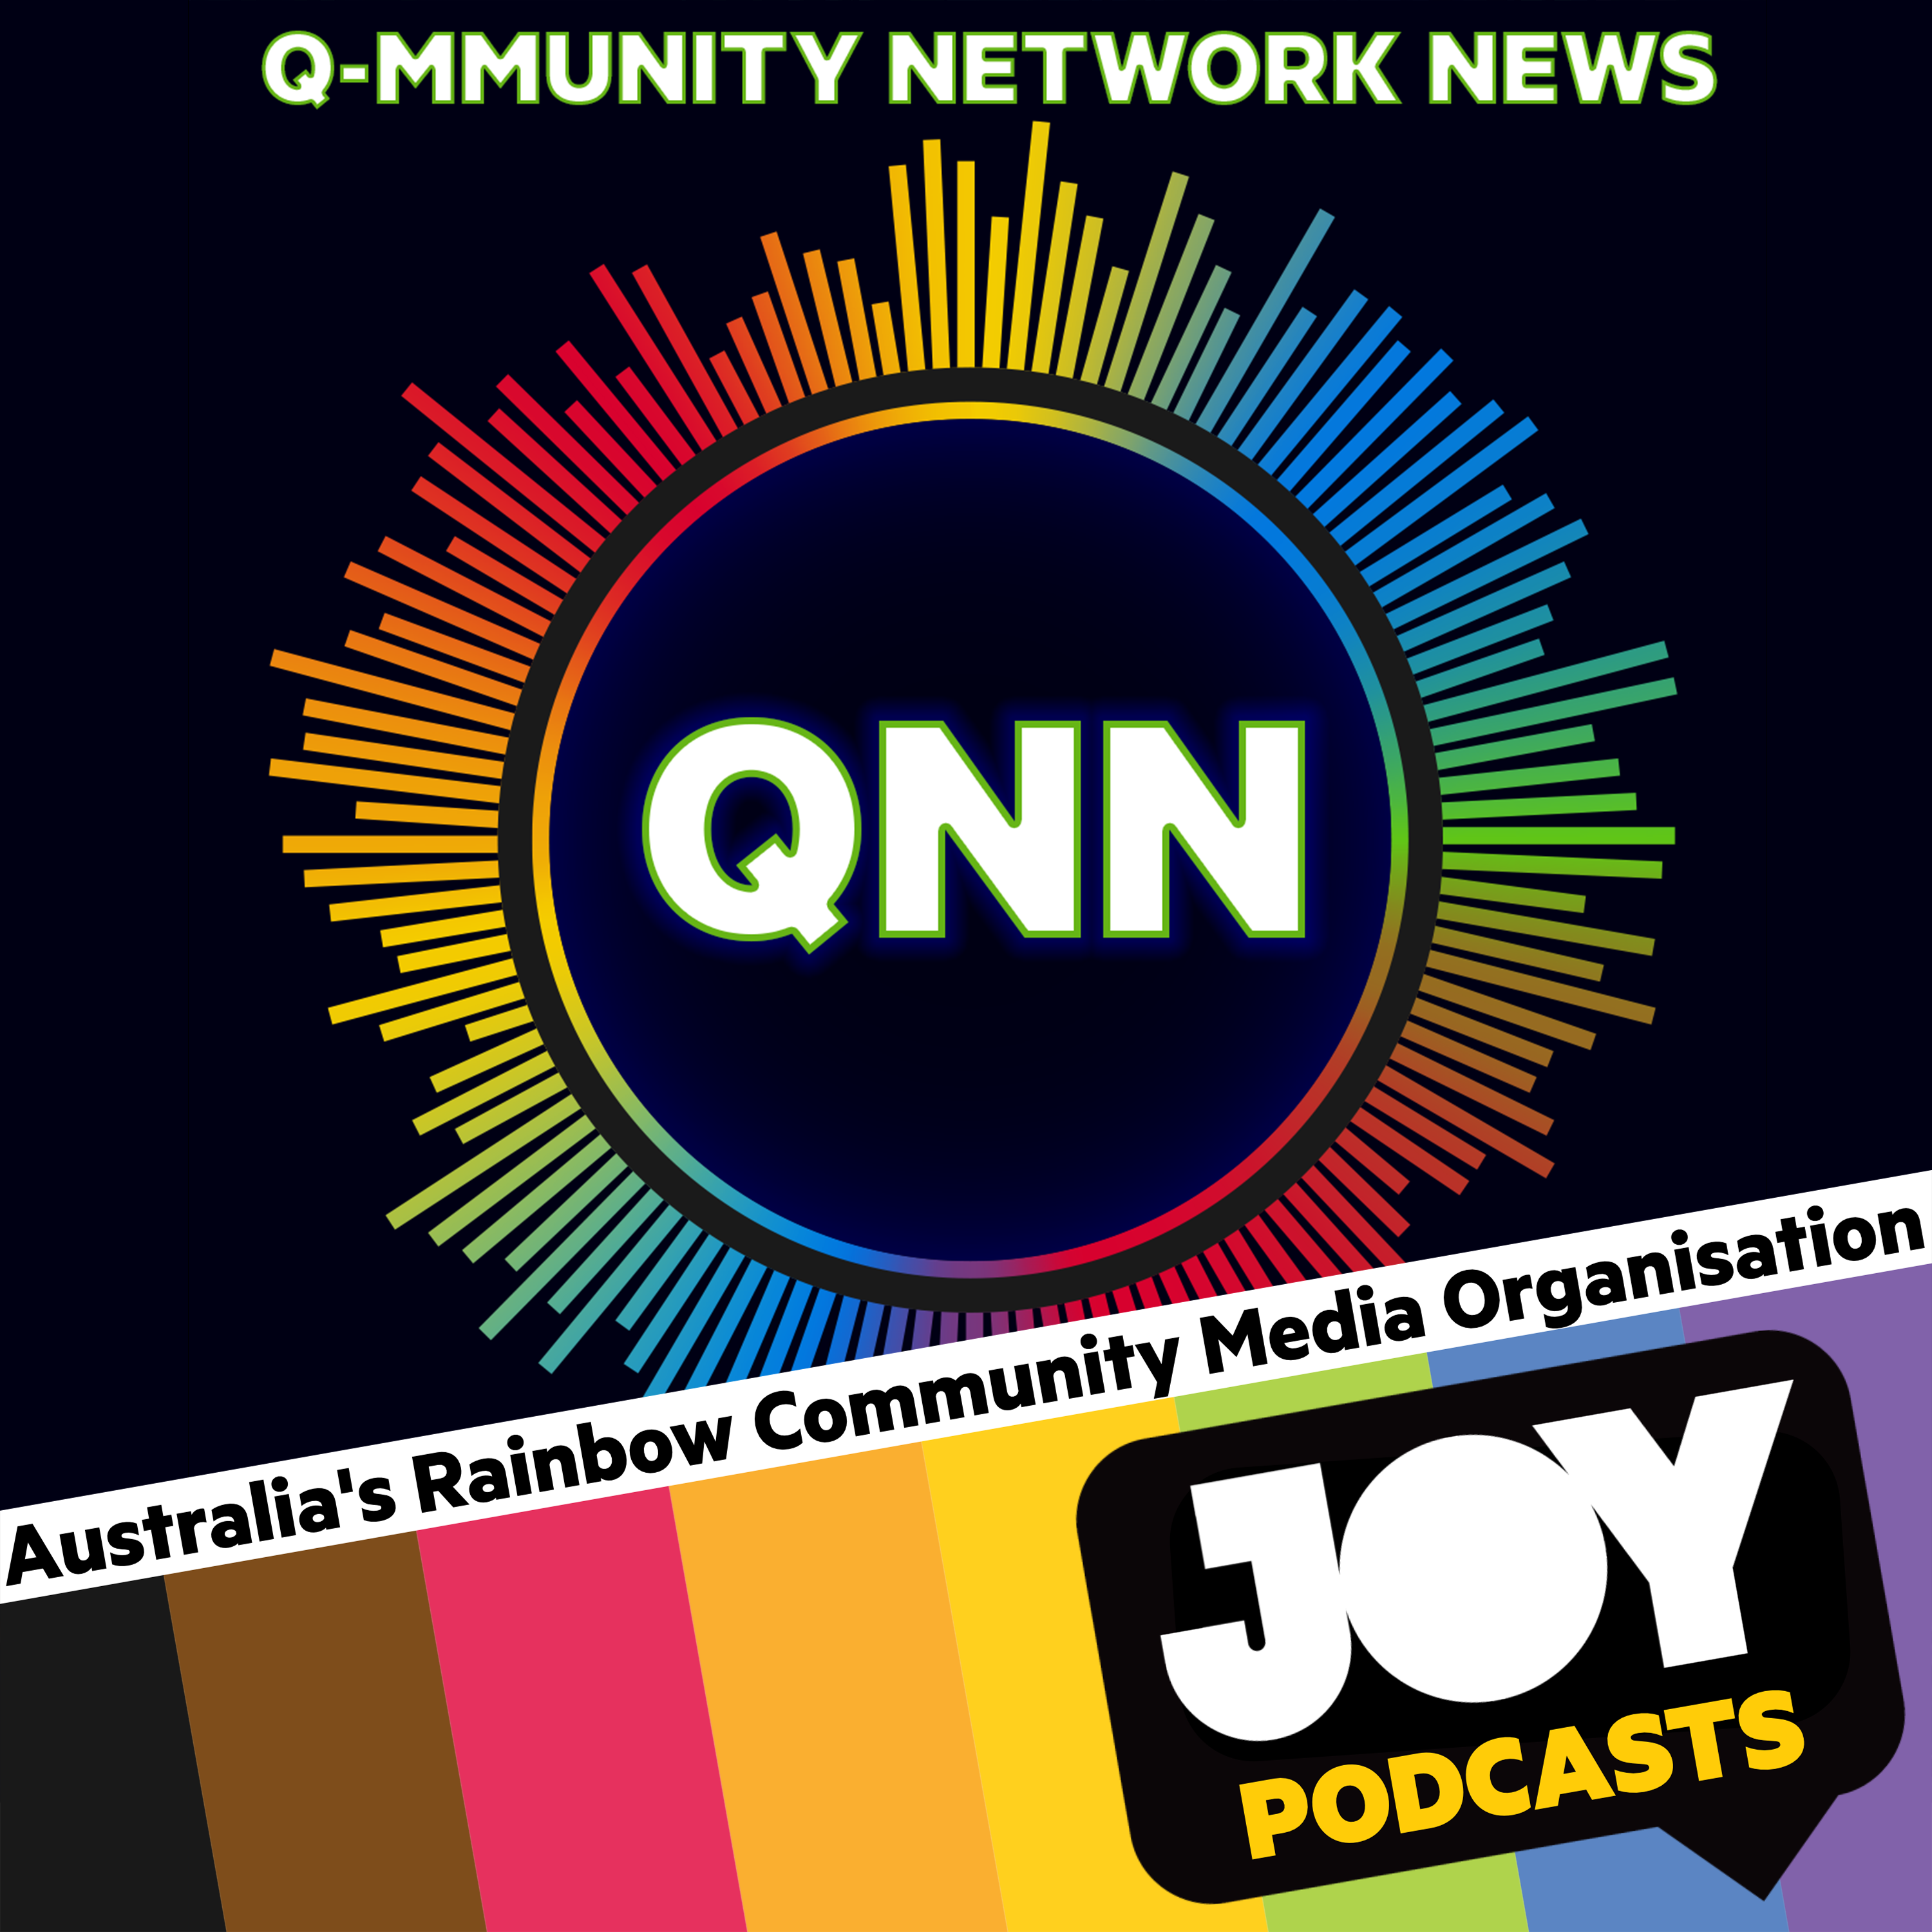 Q-mmunity Network News (QNN) – weekly queer news and sport